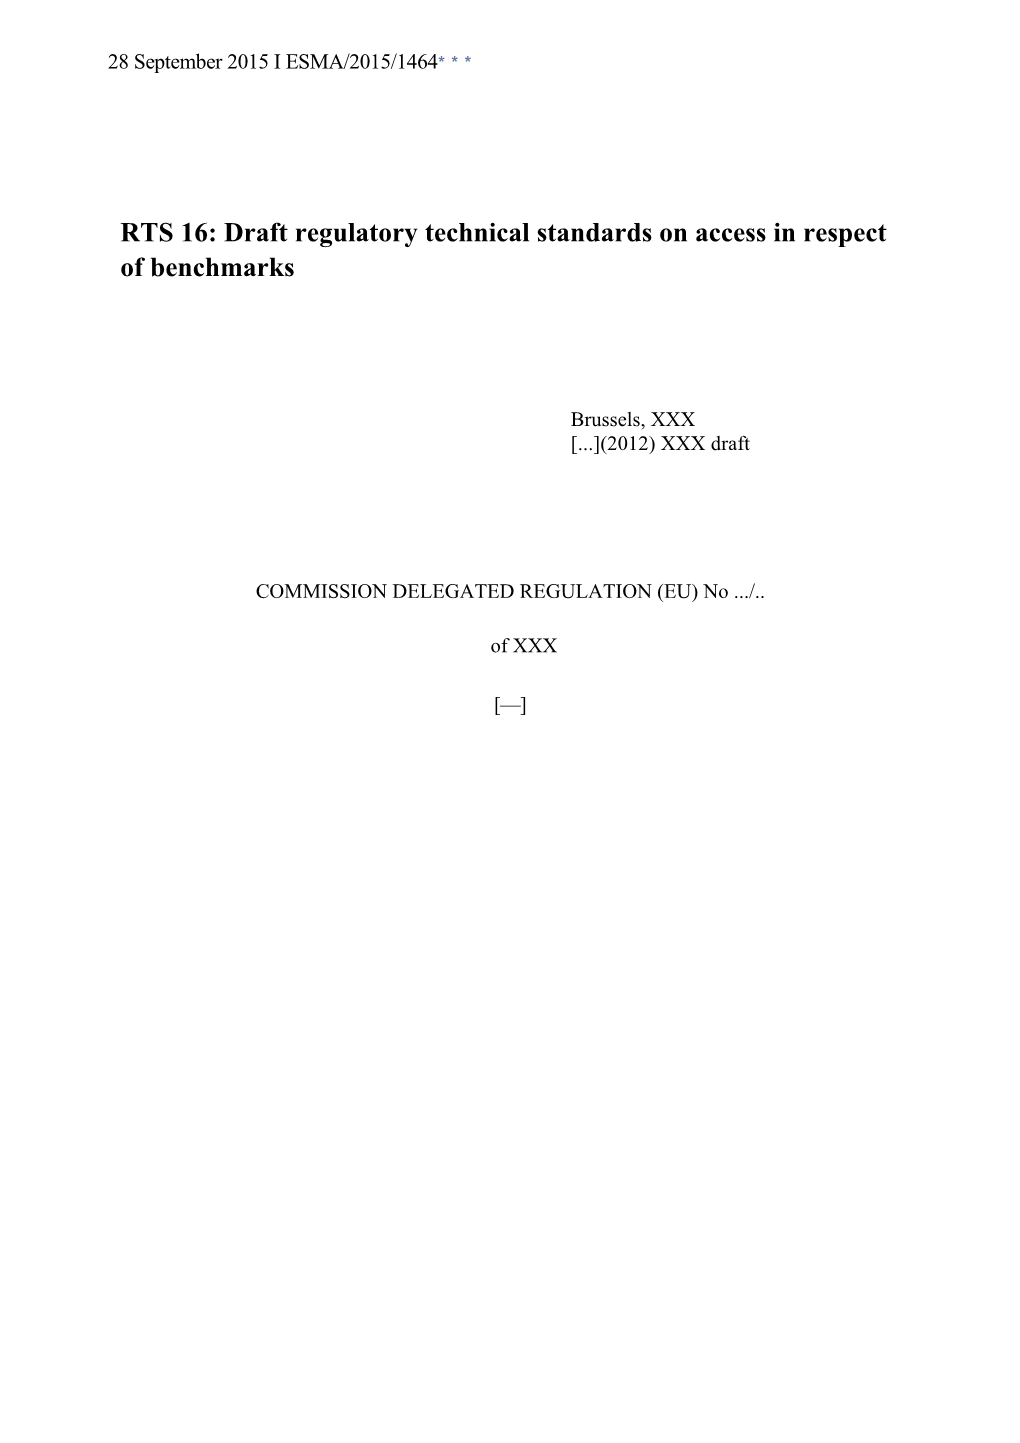 RTS 16: Draft Regulatory Technical Standards on Access in Respect of Benchmarks